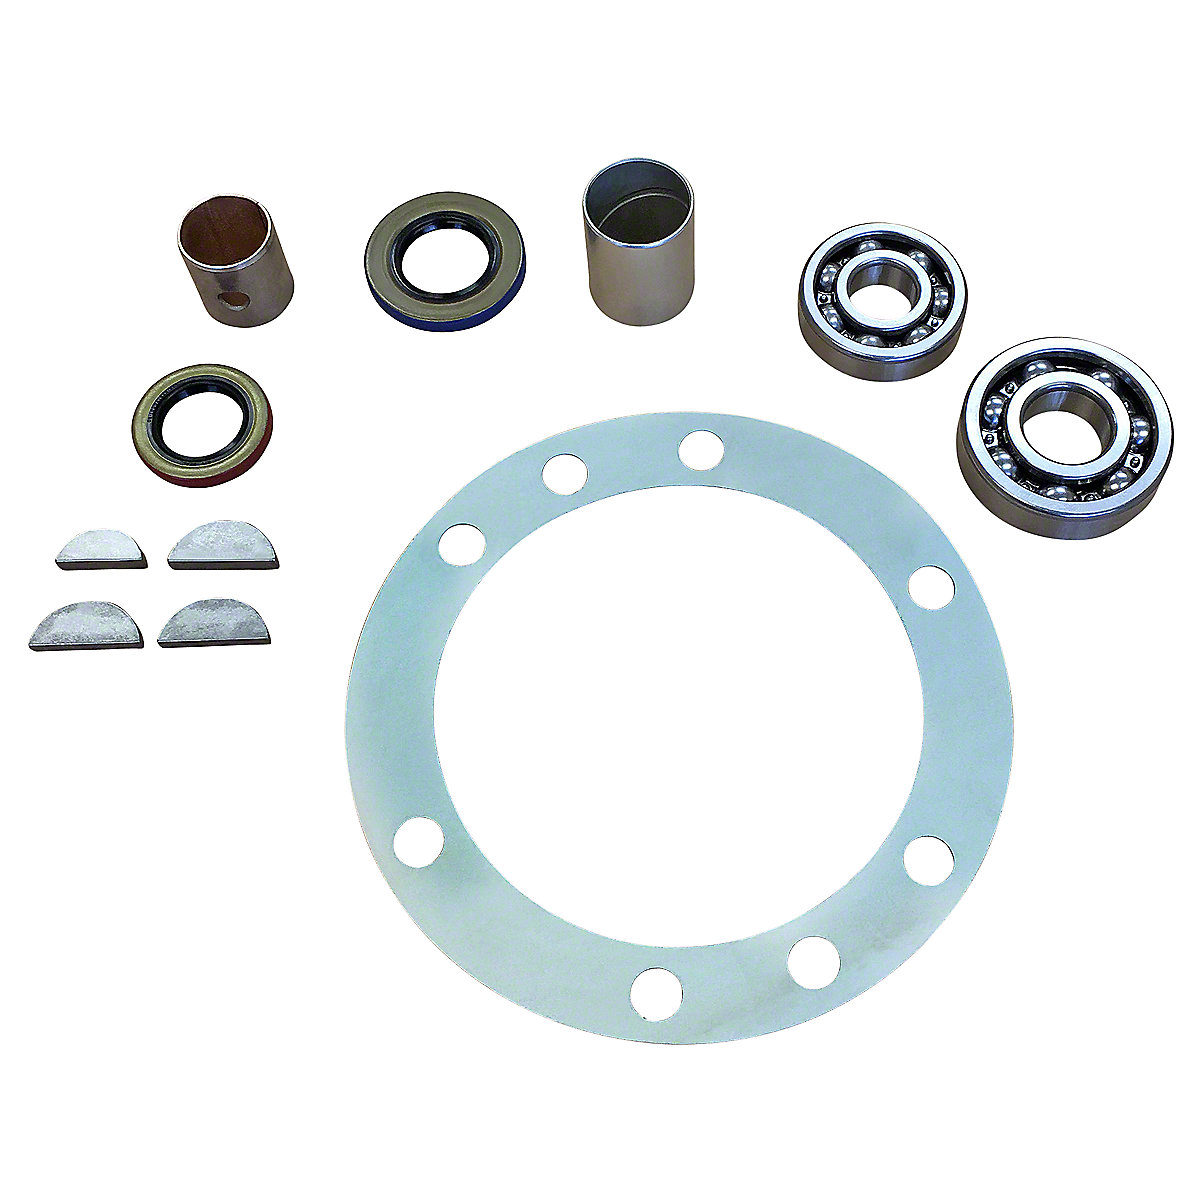 New and Improved 11-Piece Steering Sector Bushing, Bearing & Seal Kit